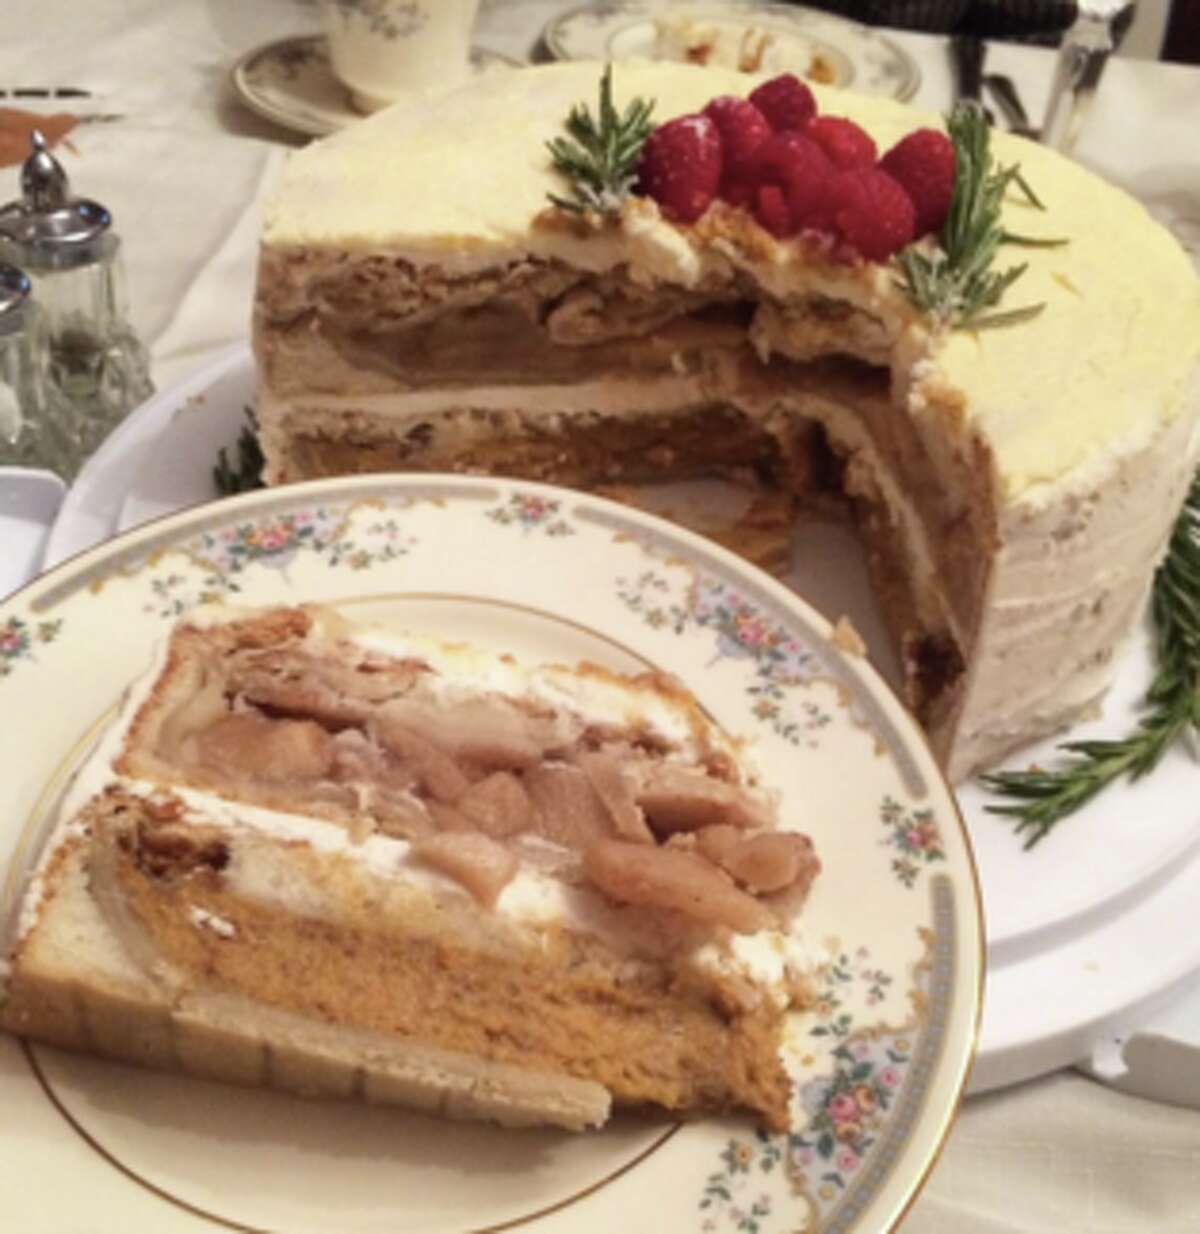 "Piecaken" is among the many foods people have been posting on social media this Thanksgiving.